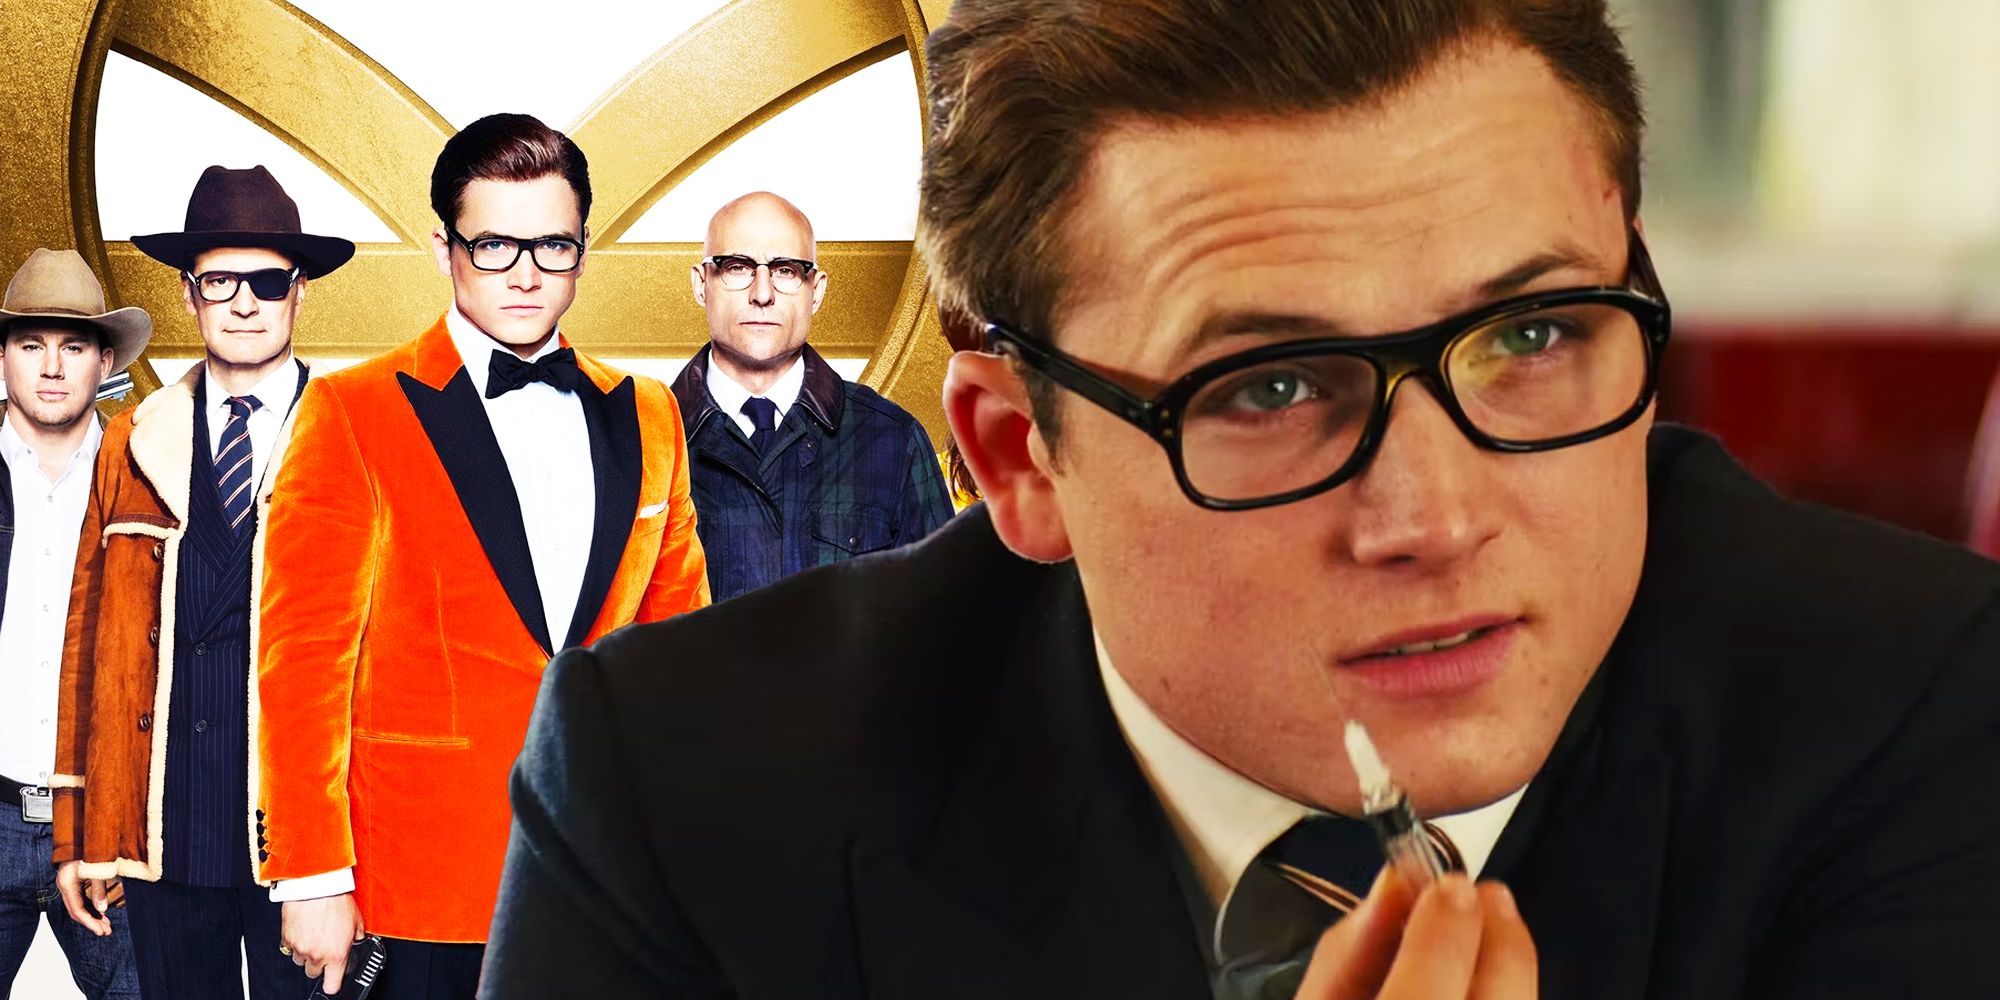 Eggsy and the Kingsman The Golden Circle poster